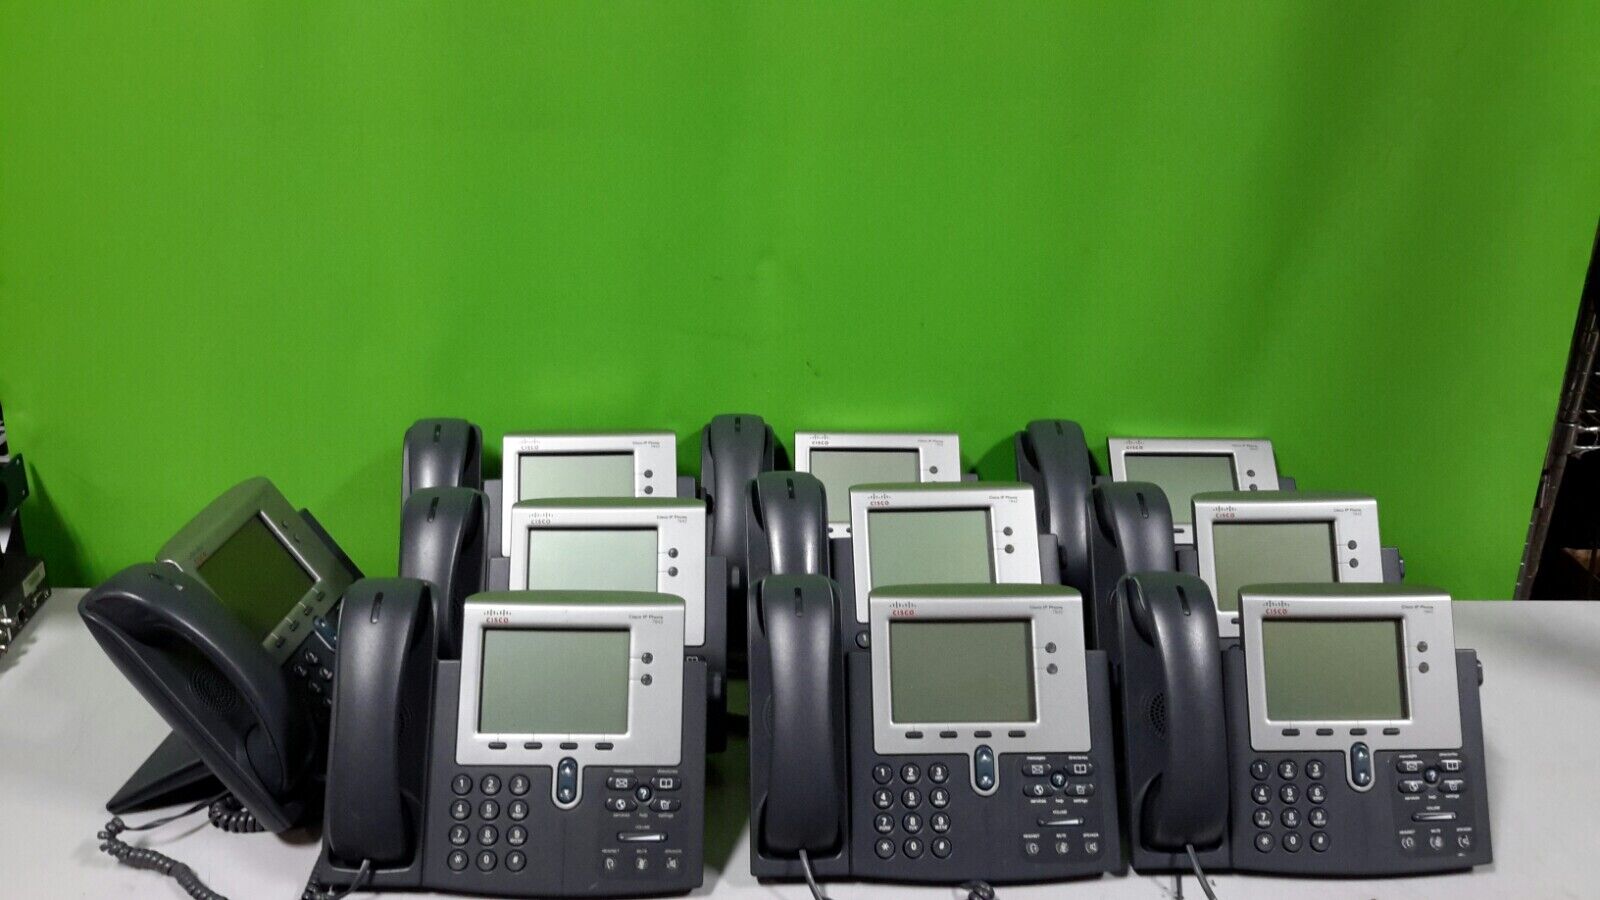 Cisco 7942g IP VoIP Telephone Phone 7942 Cp-7942g  Lot Of 10